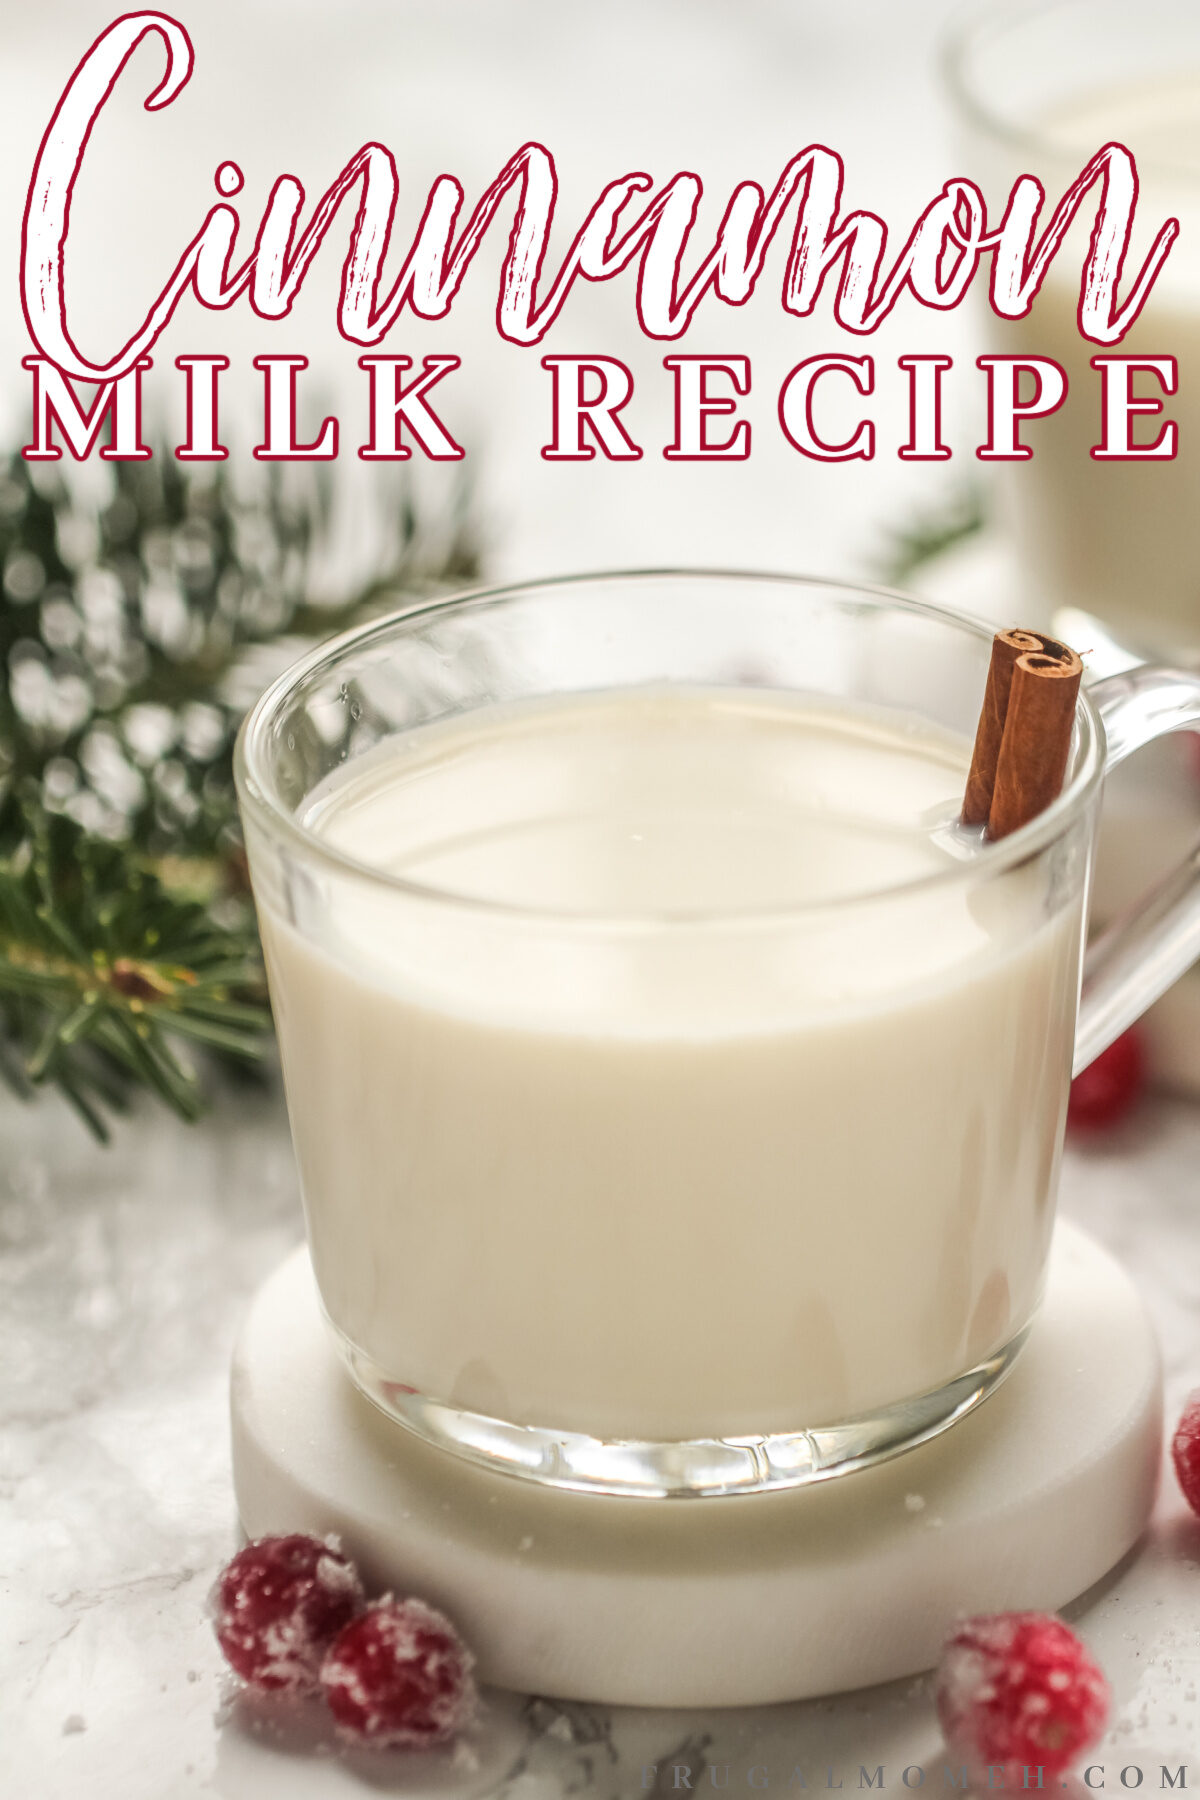 A delicious and simple warm cinnamon milk recipe that offers comfort on cold winter nights. Cozy up with a mug of this sweet spiced drink.